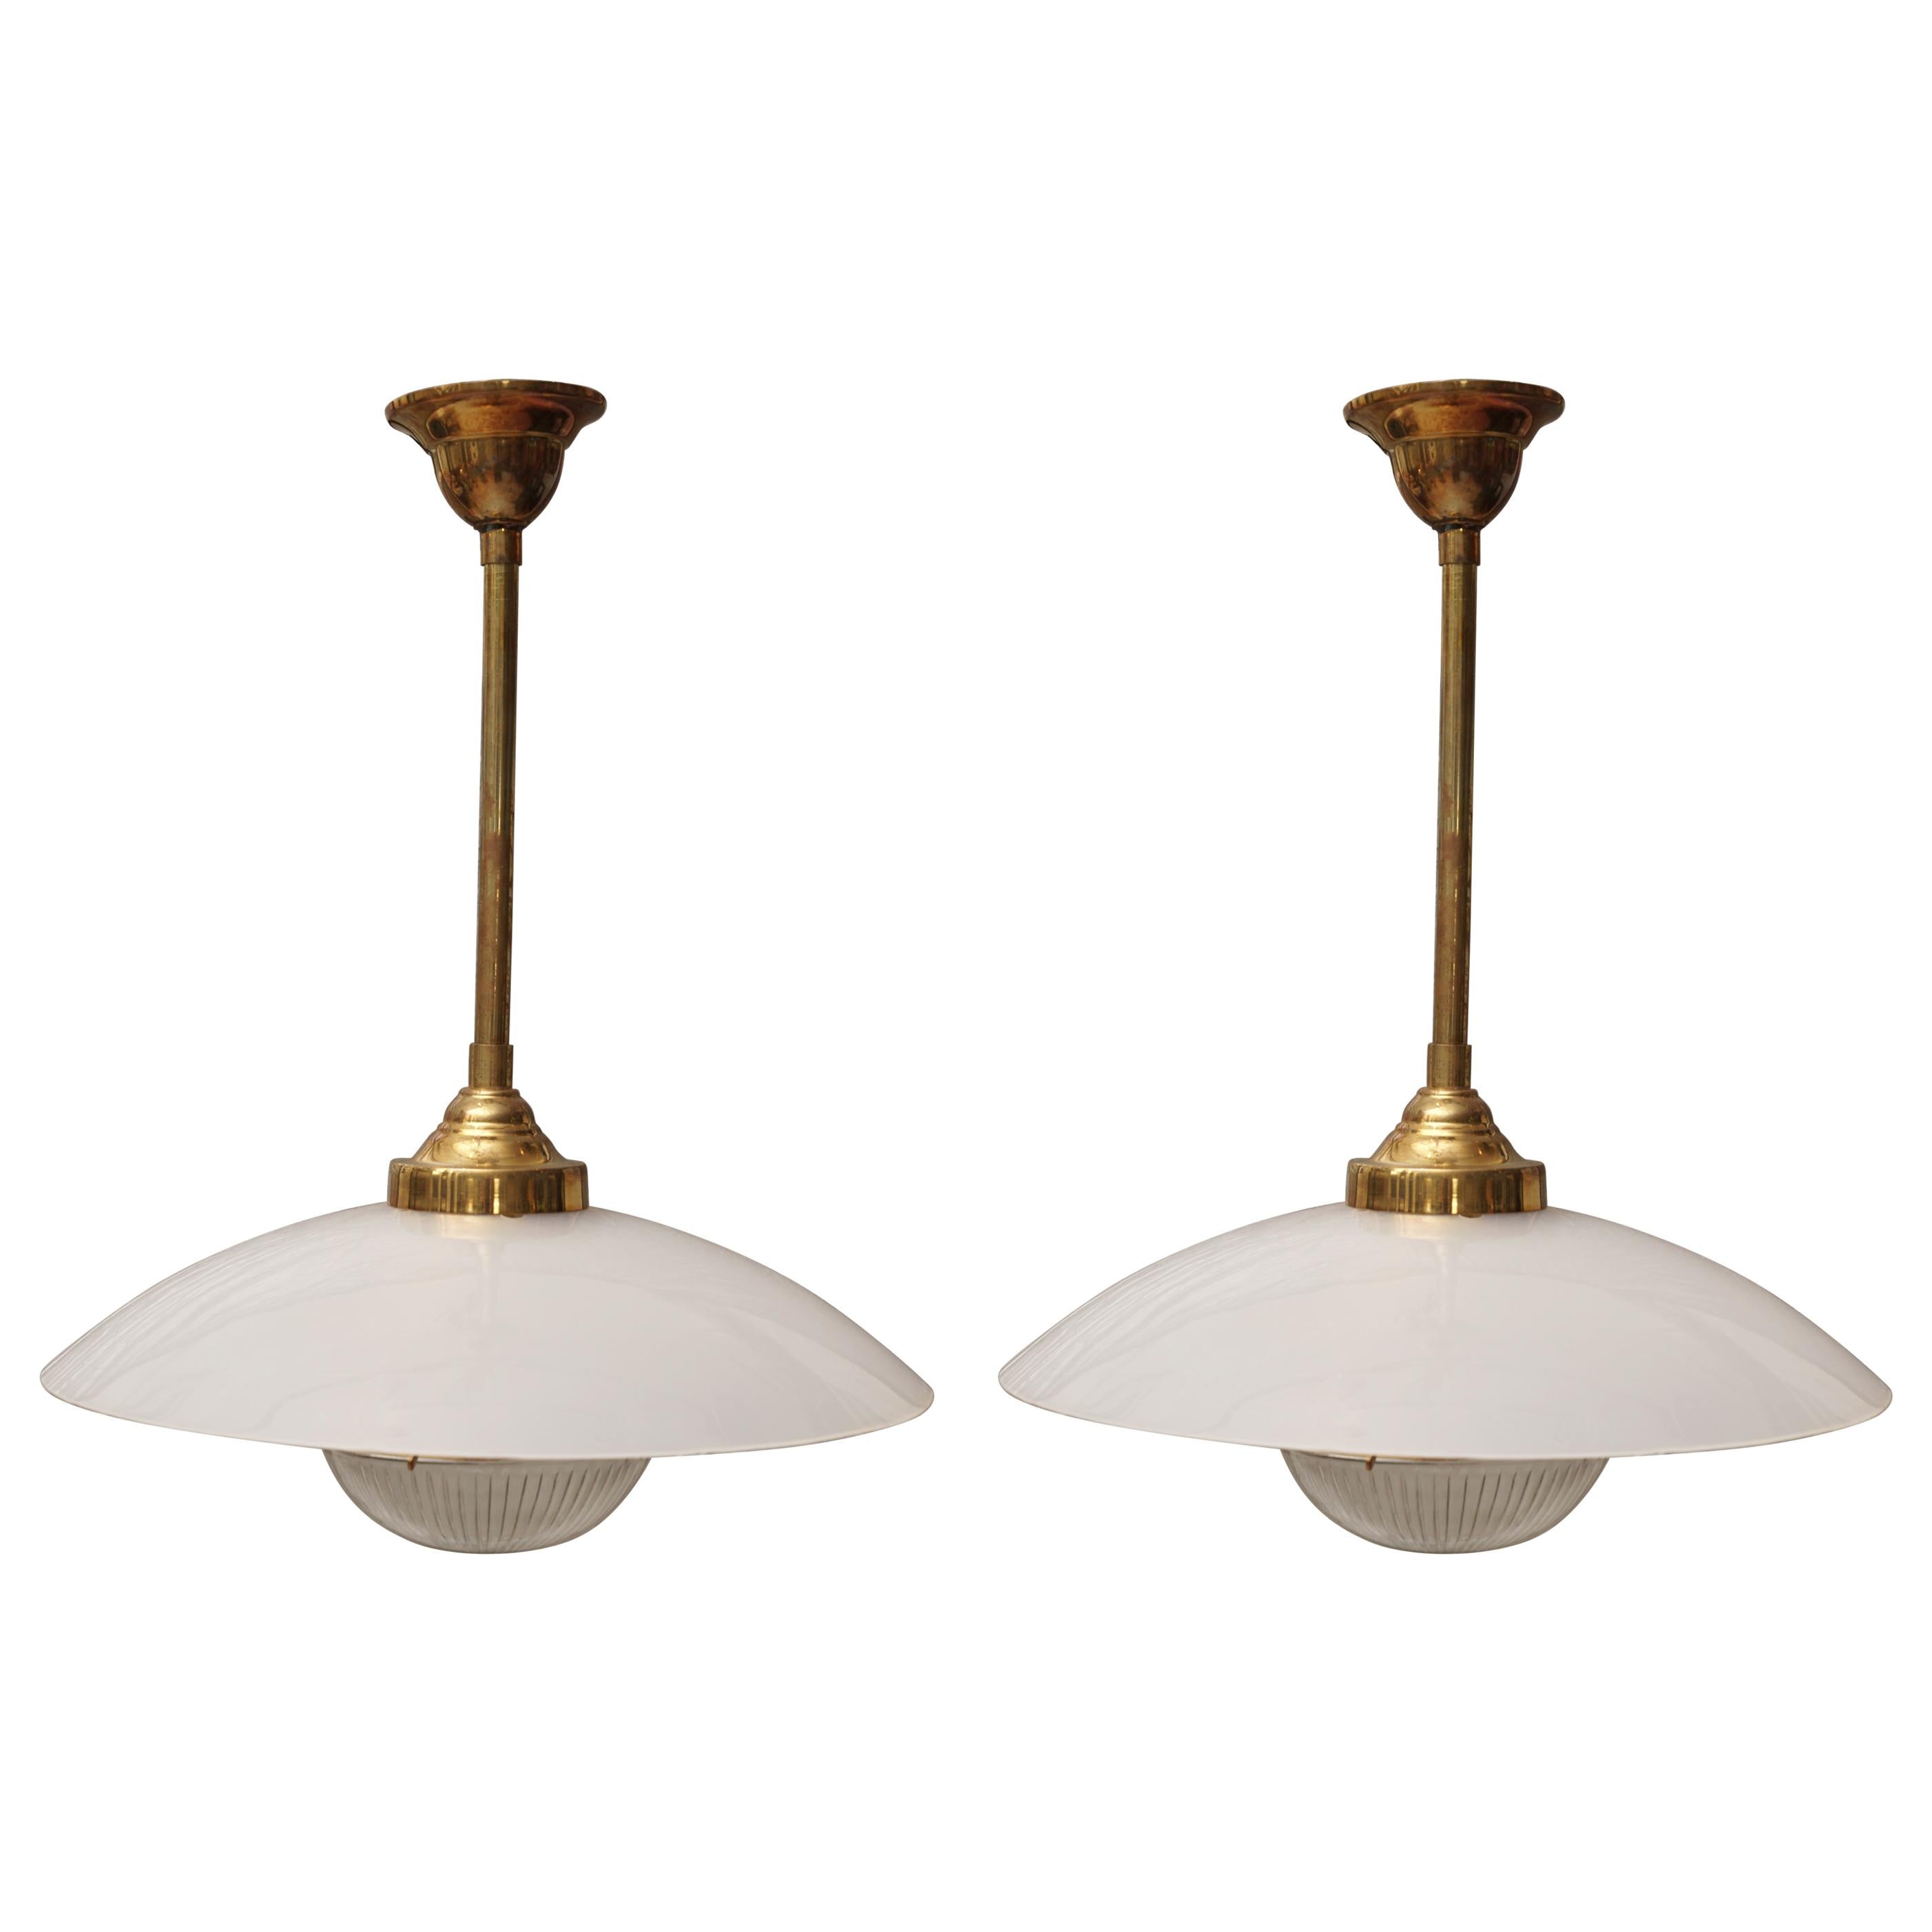 Midcentury Pair of Lucite, Brass and Glass Pendant Lights